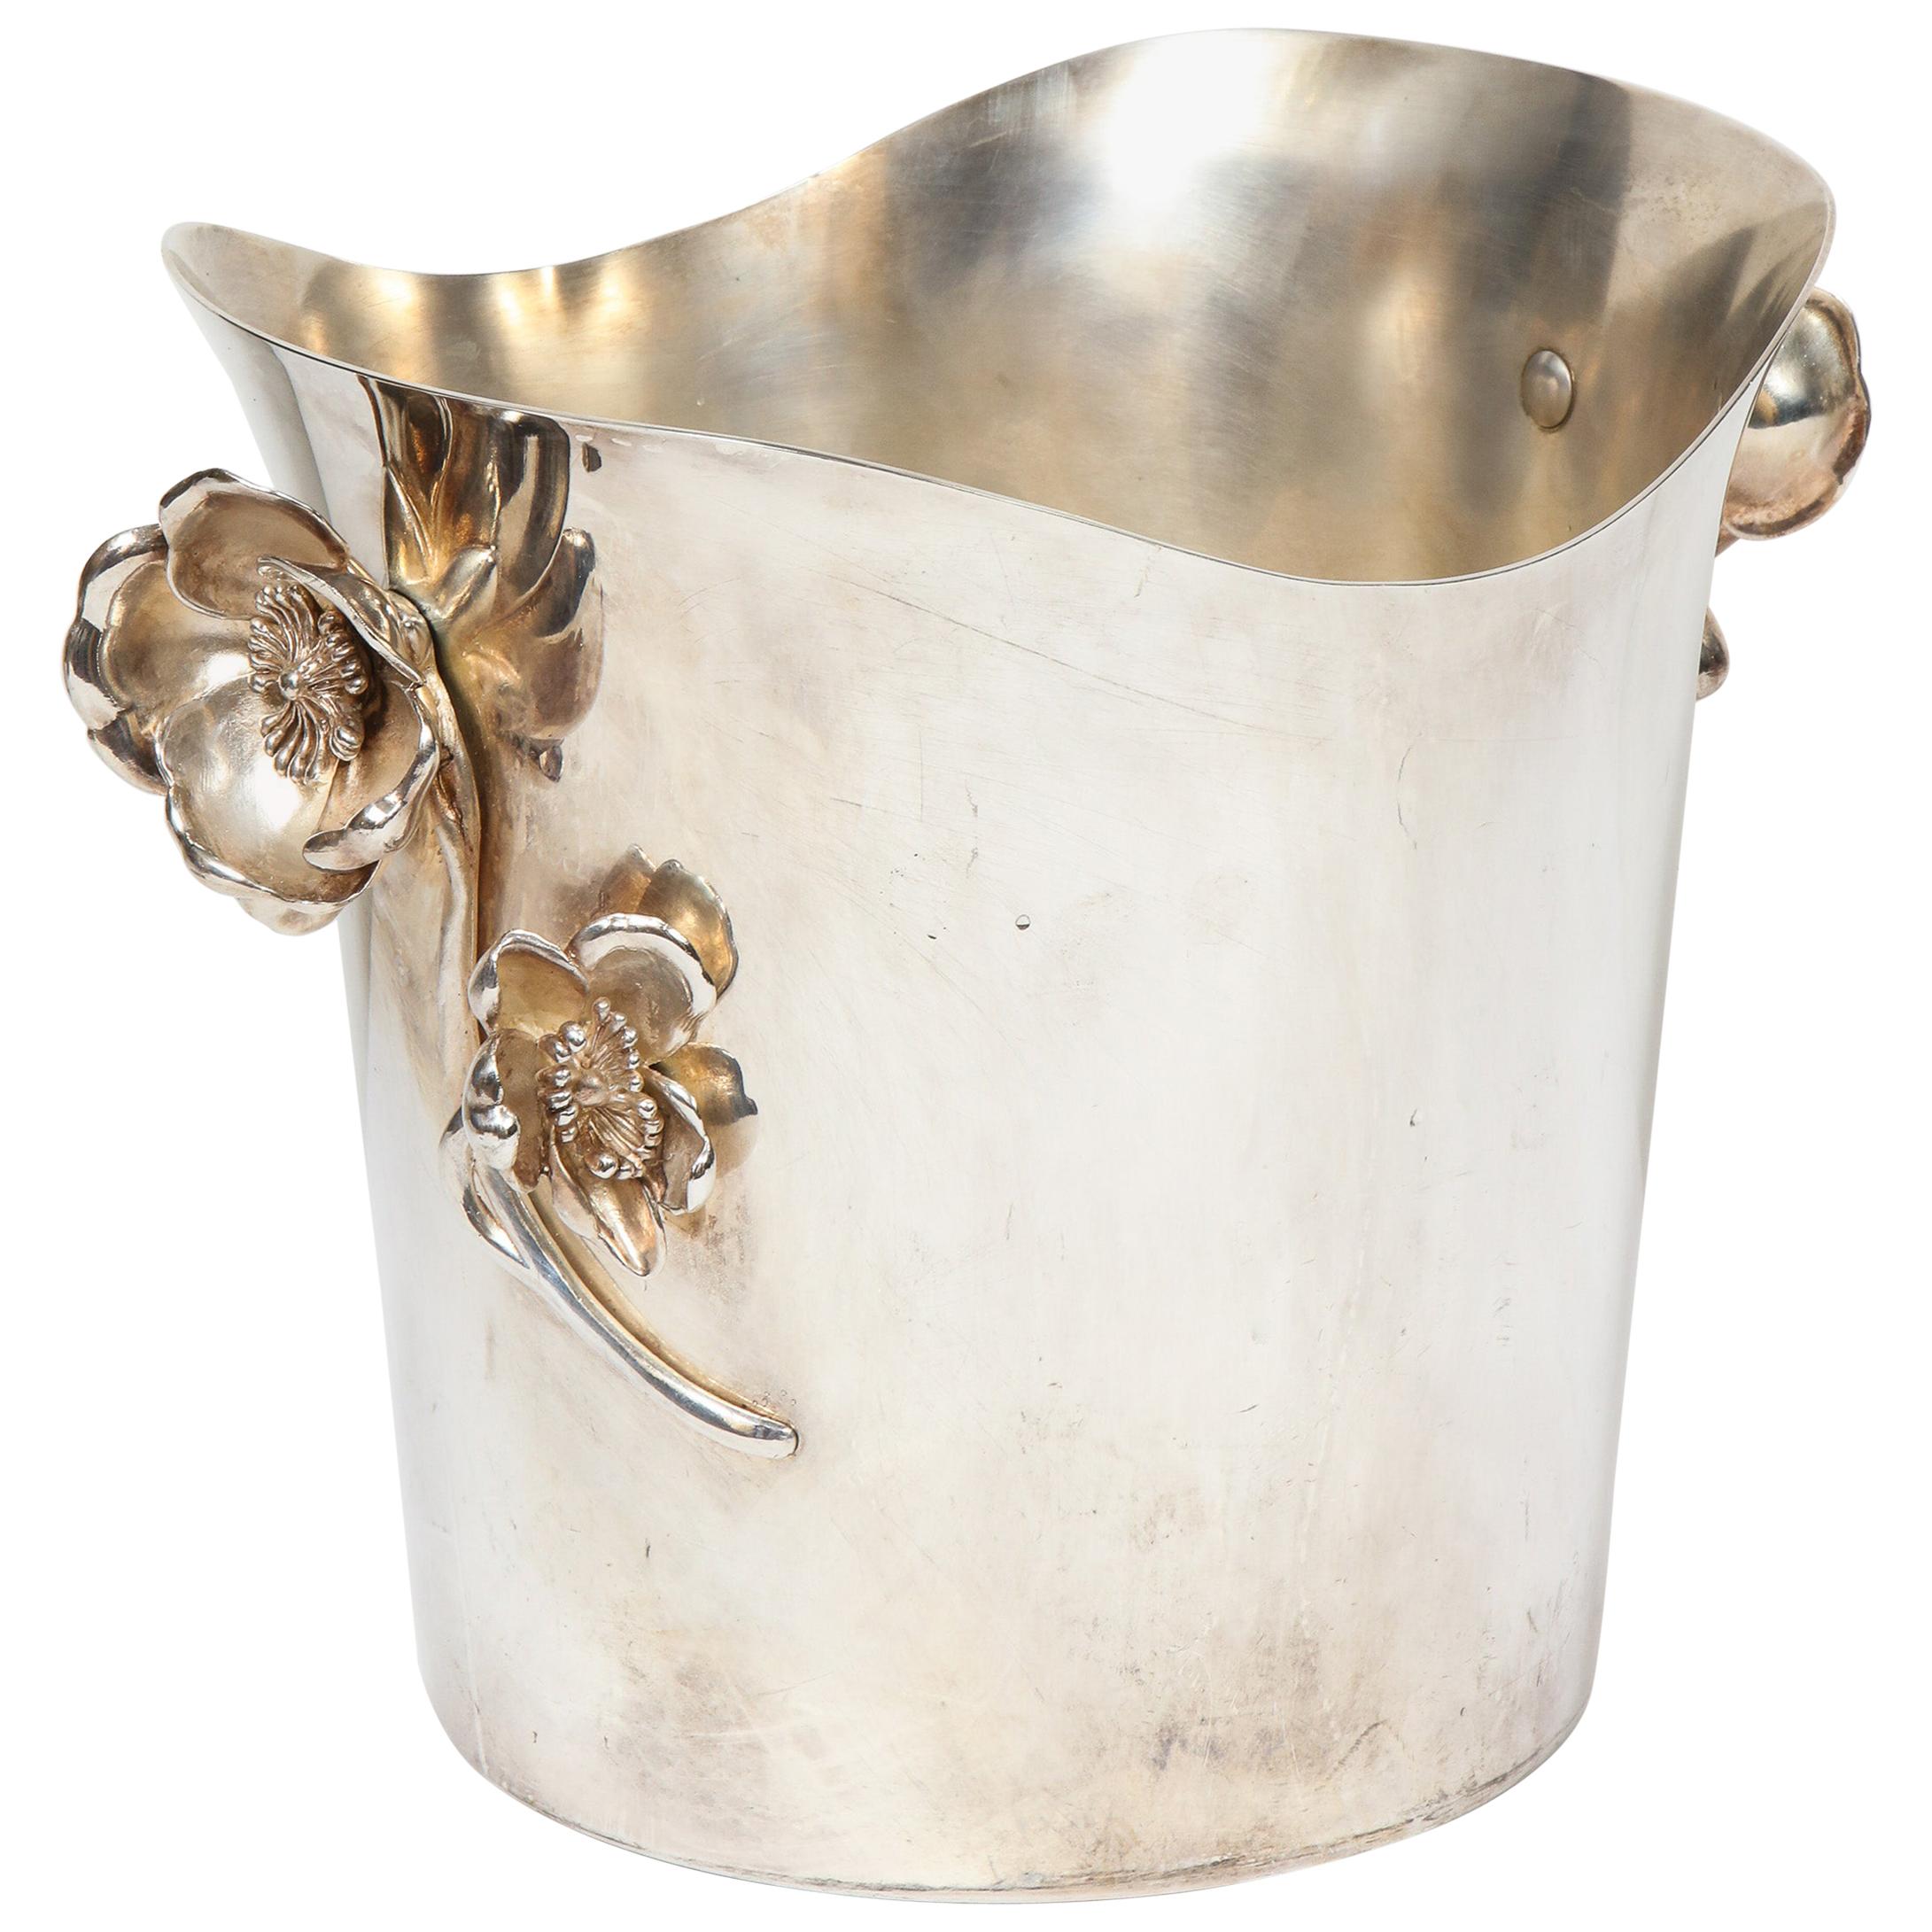 Christofle Paris Silver Plated "Anemone" Champagne Bucket / Wine Cooler